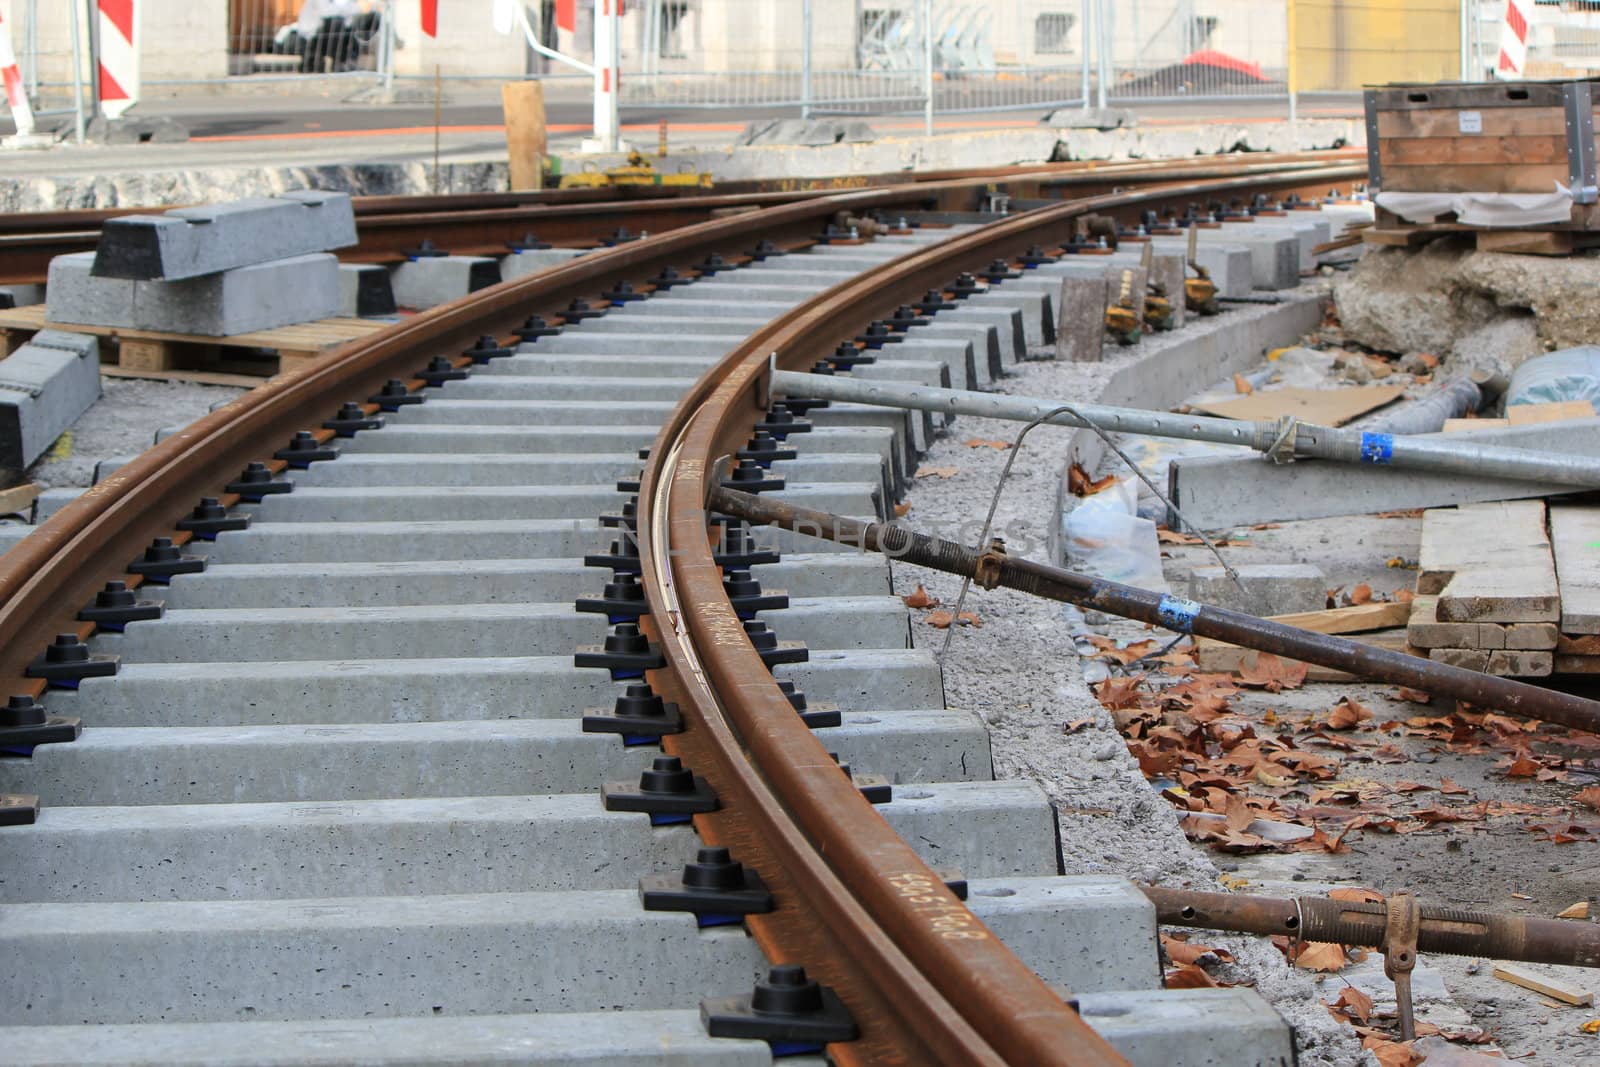 Unfinished railway construction for tramway transport in the city